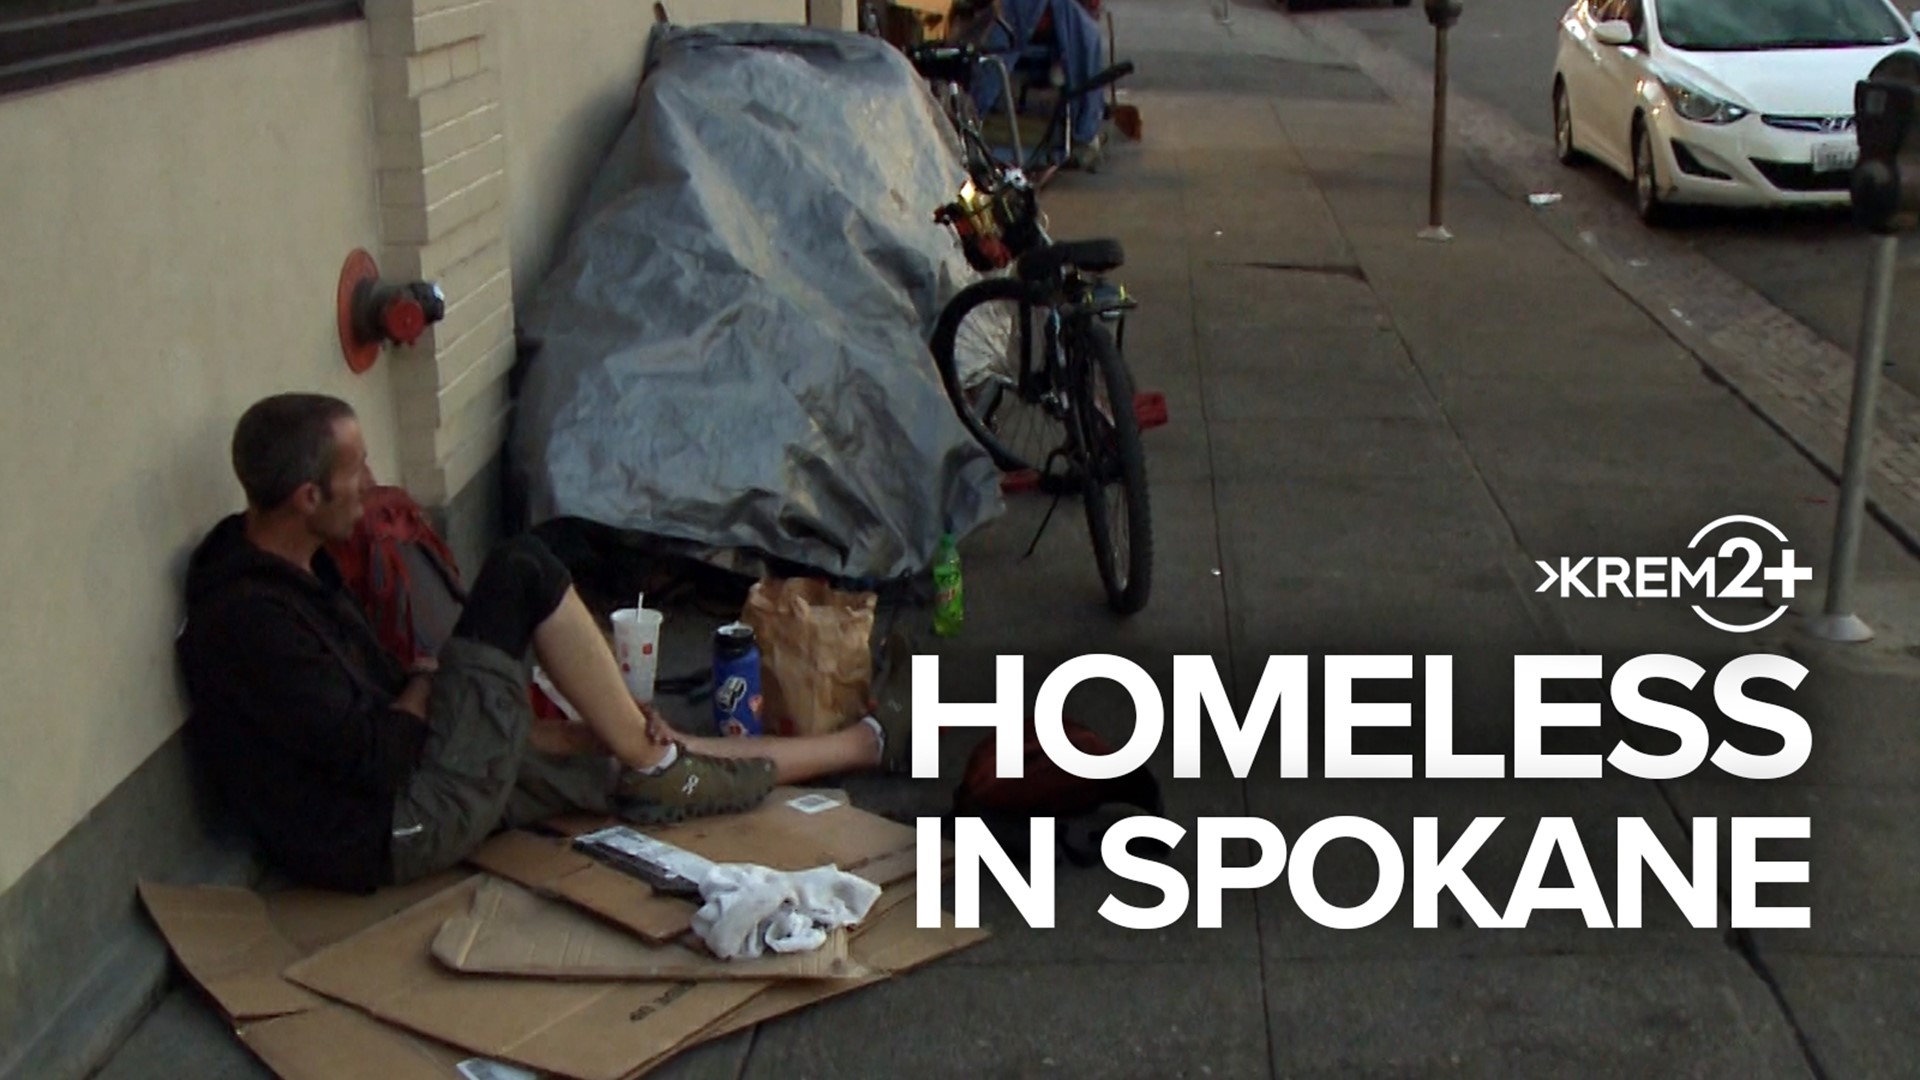 Homelessness is one of the biggest issues in Spokane. KREM 2 News brings more to the story with updates on sit & lie, the Trent Shelter, and the I-90 homeless camp.